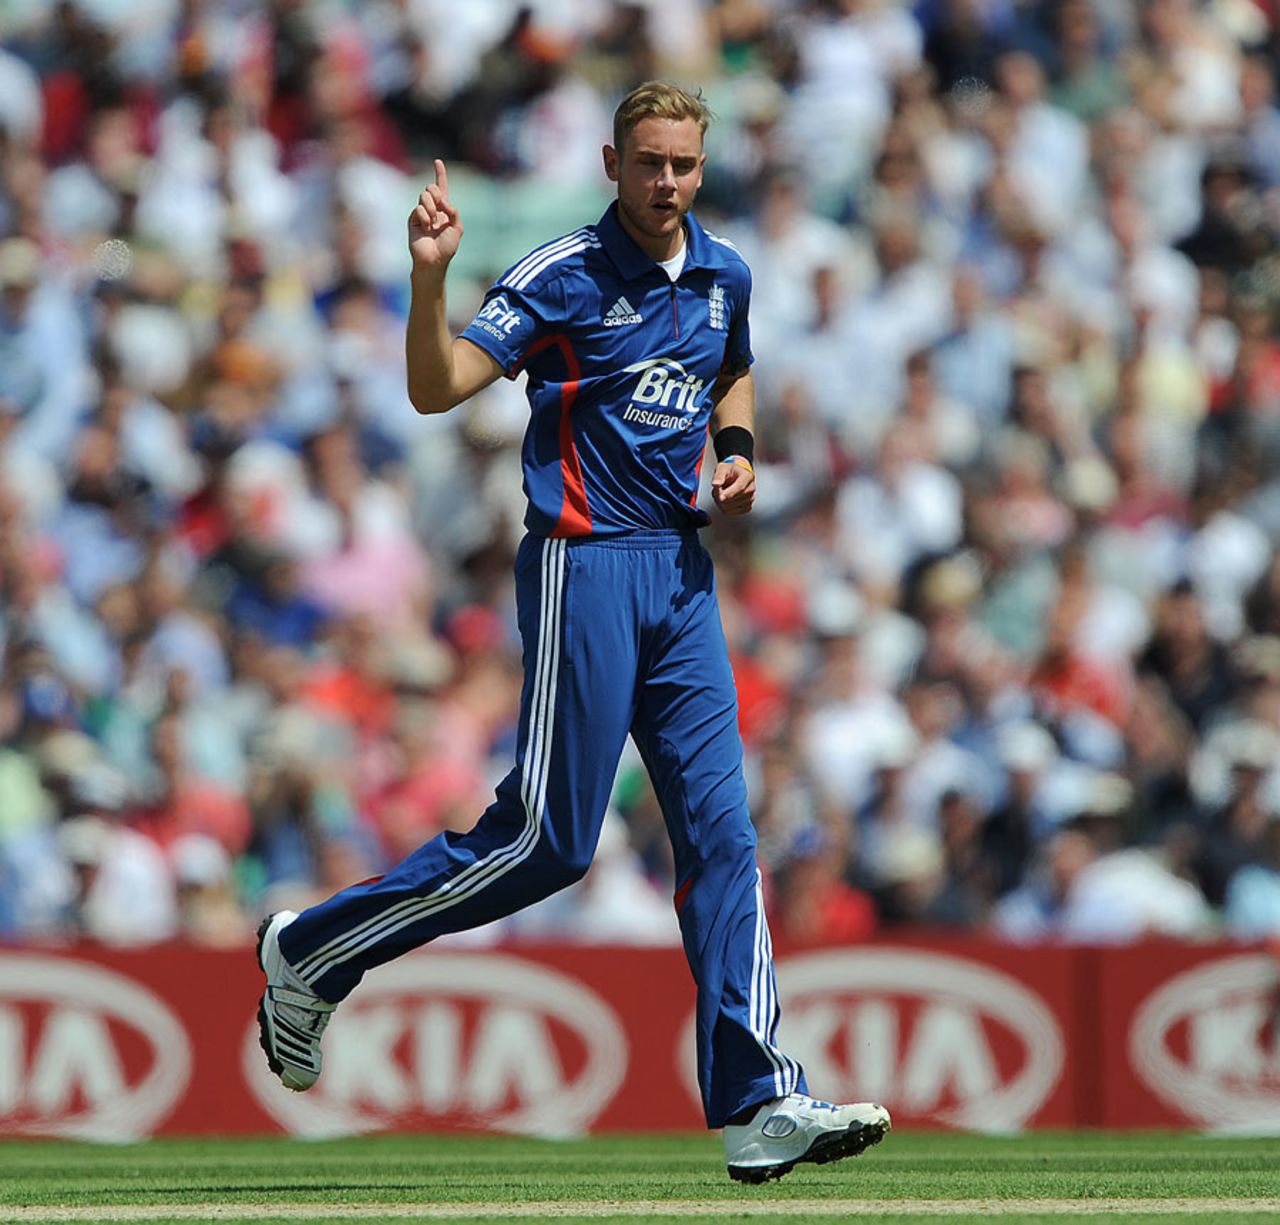 Stuart Broad claimed the wicket of Dwayne Smith with his second ball, England v West Indies, 2nd ODI, The Oval, June 19, 2012